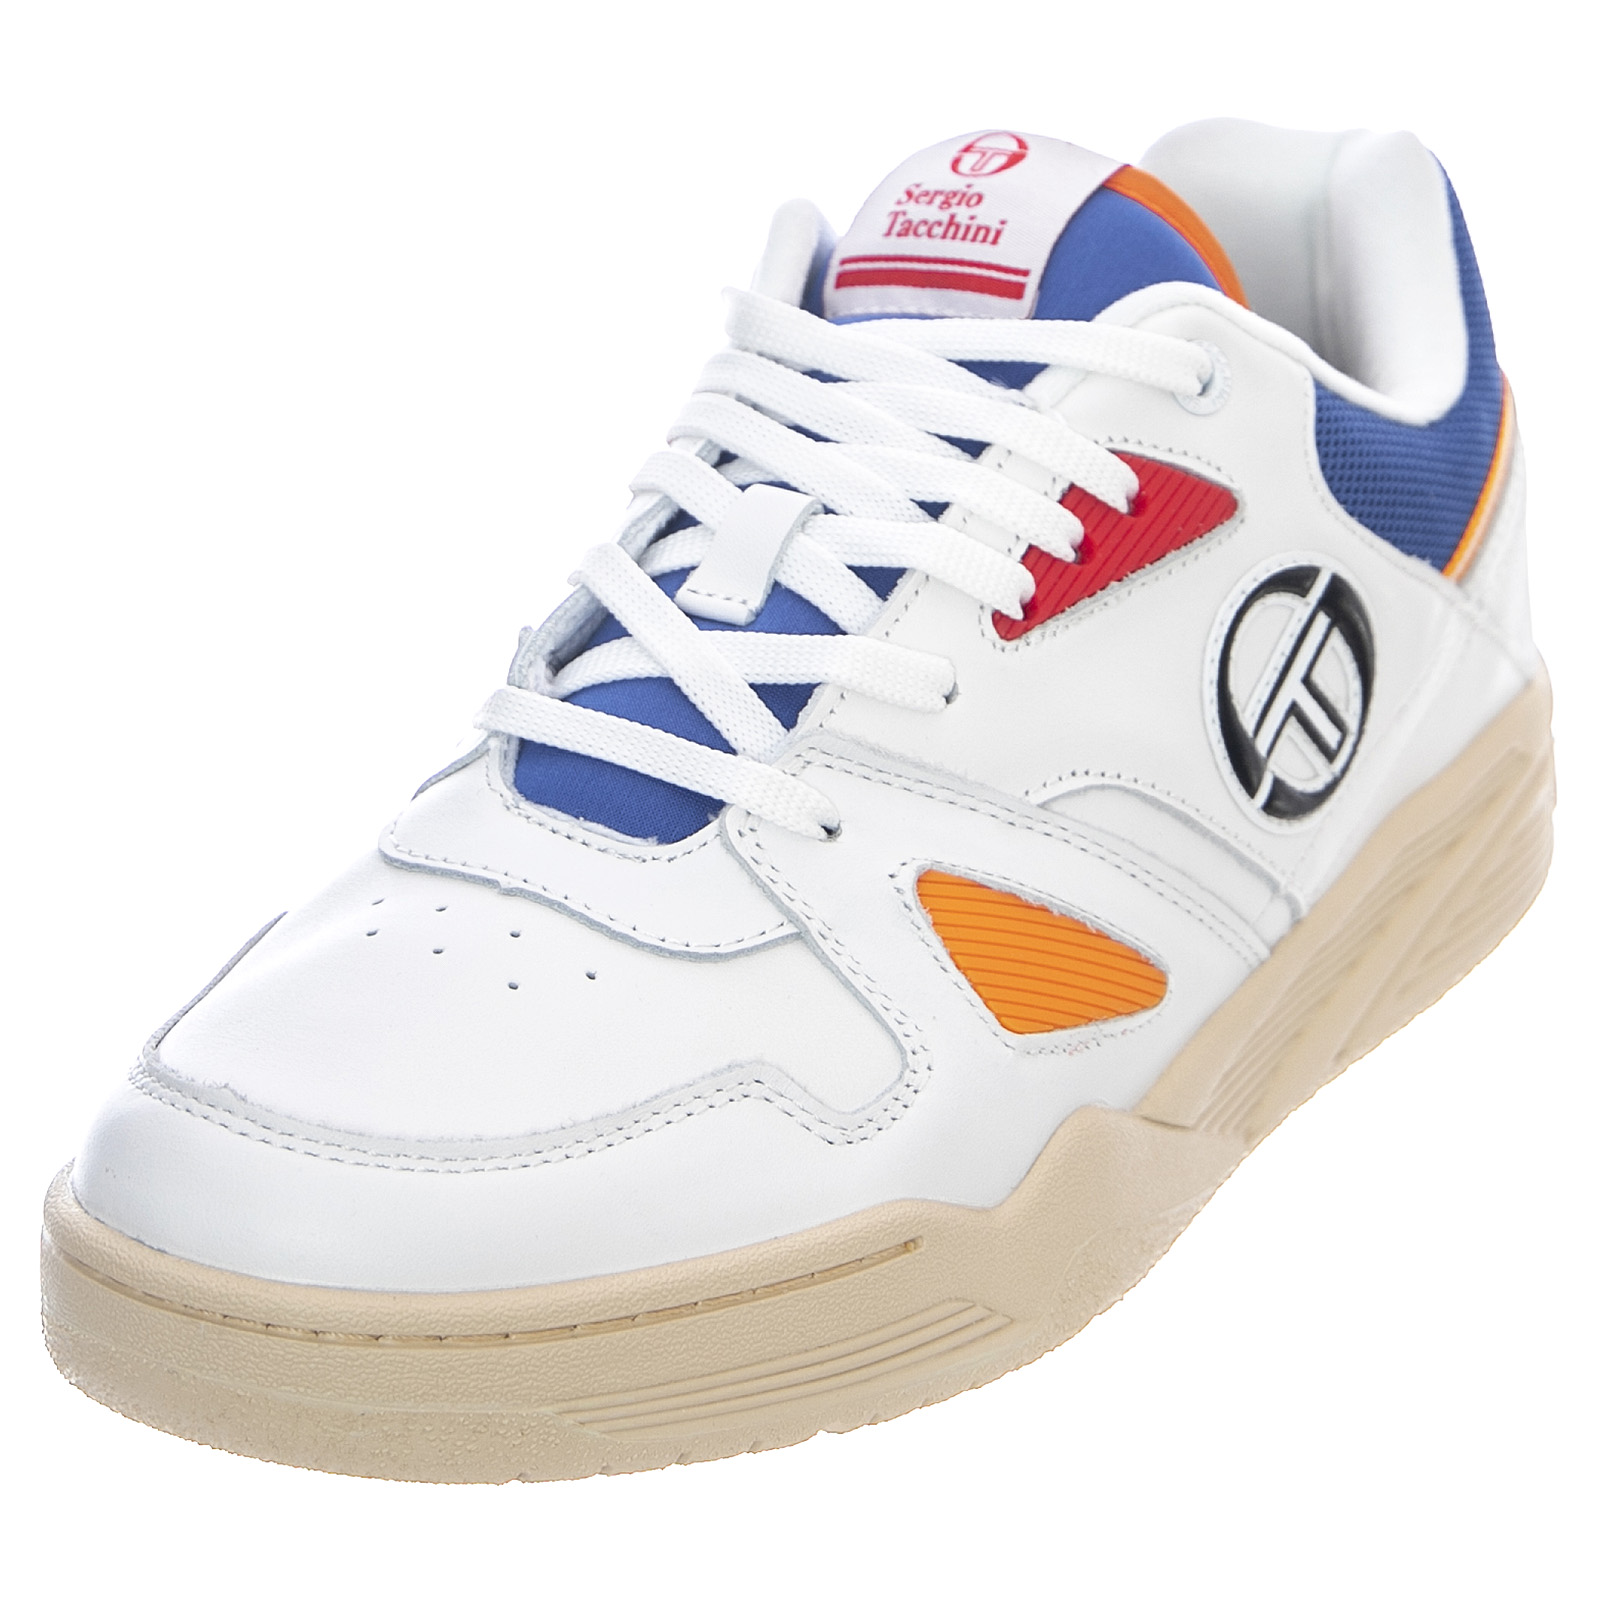 SERGIO TACCHINI Top Play Sport MX Shoes Low Man White